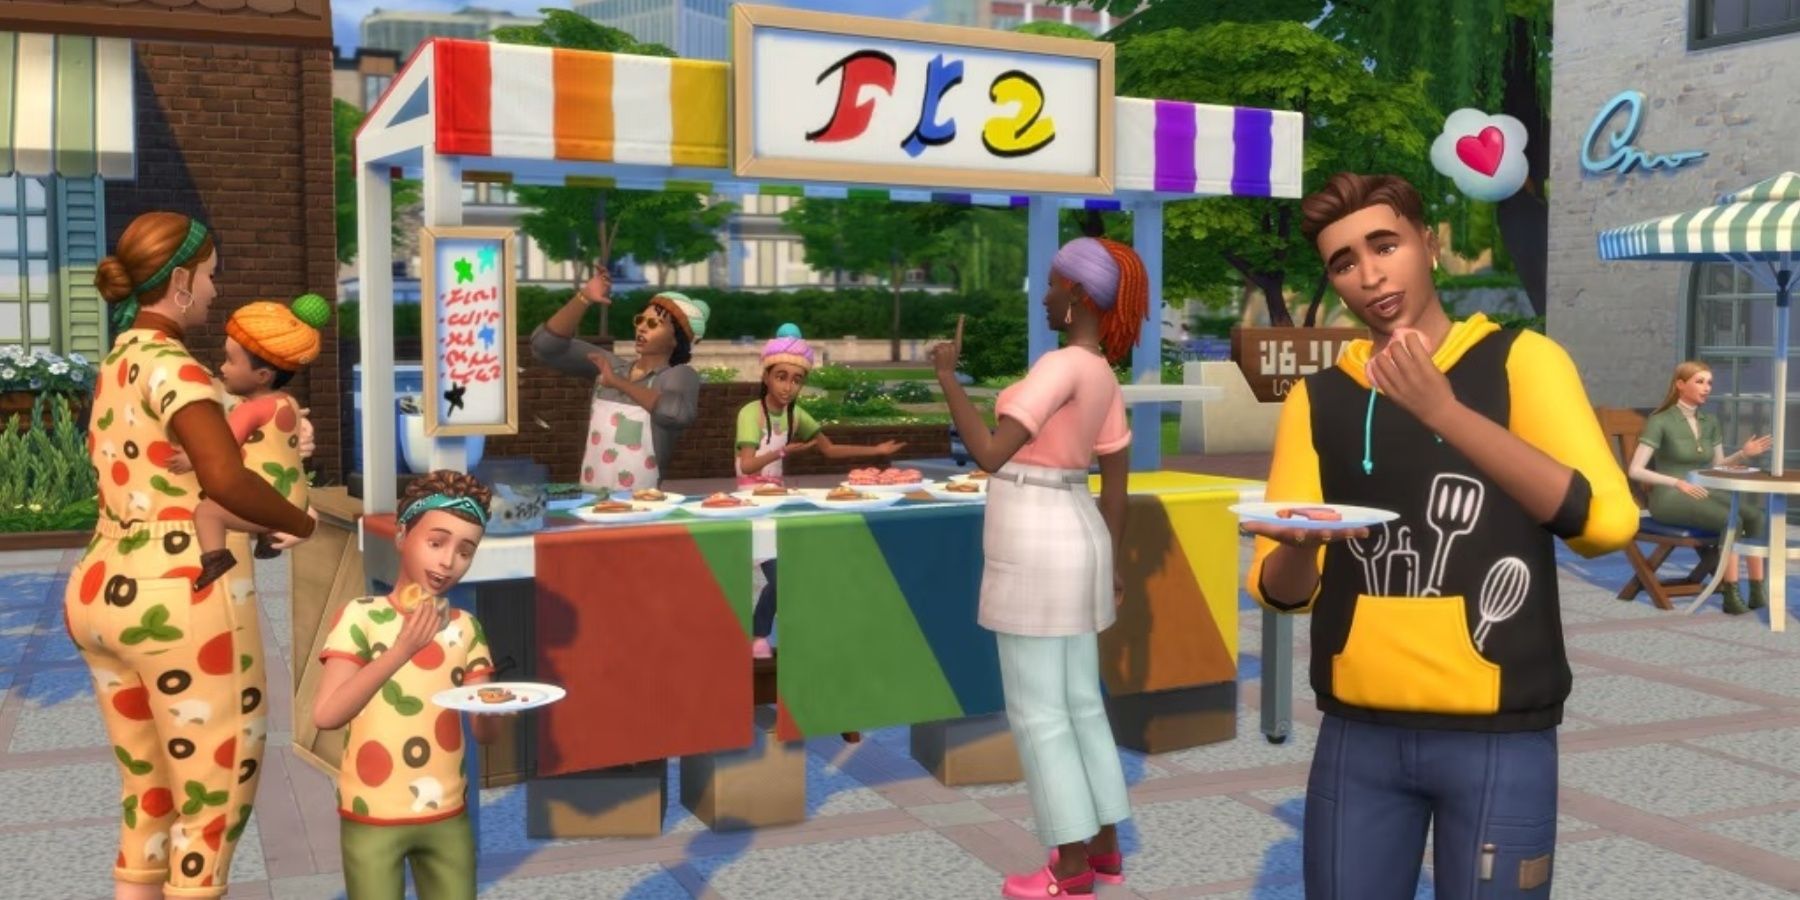 food stand item in upcoming stuff pack